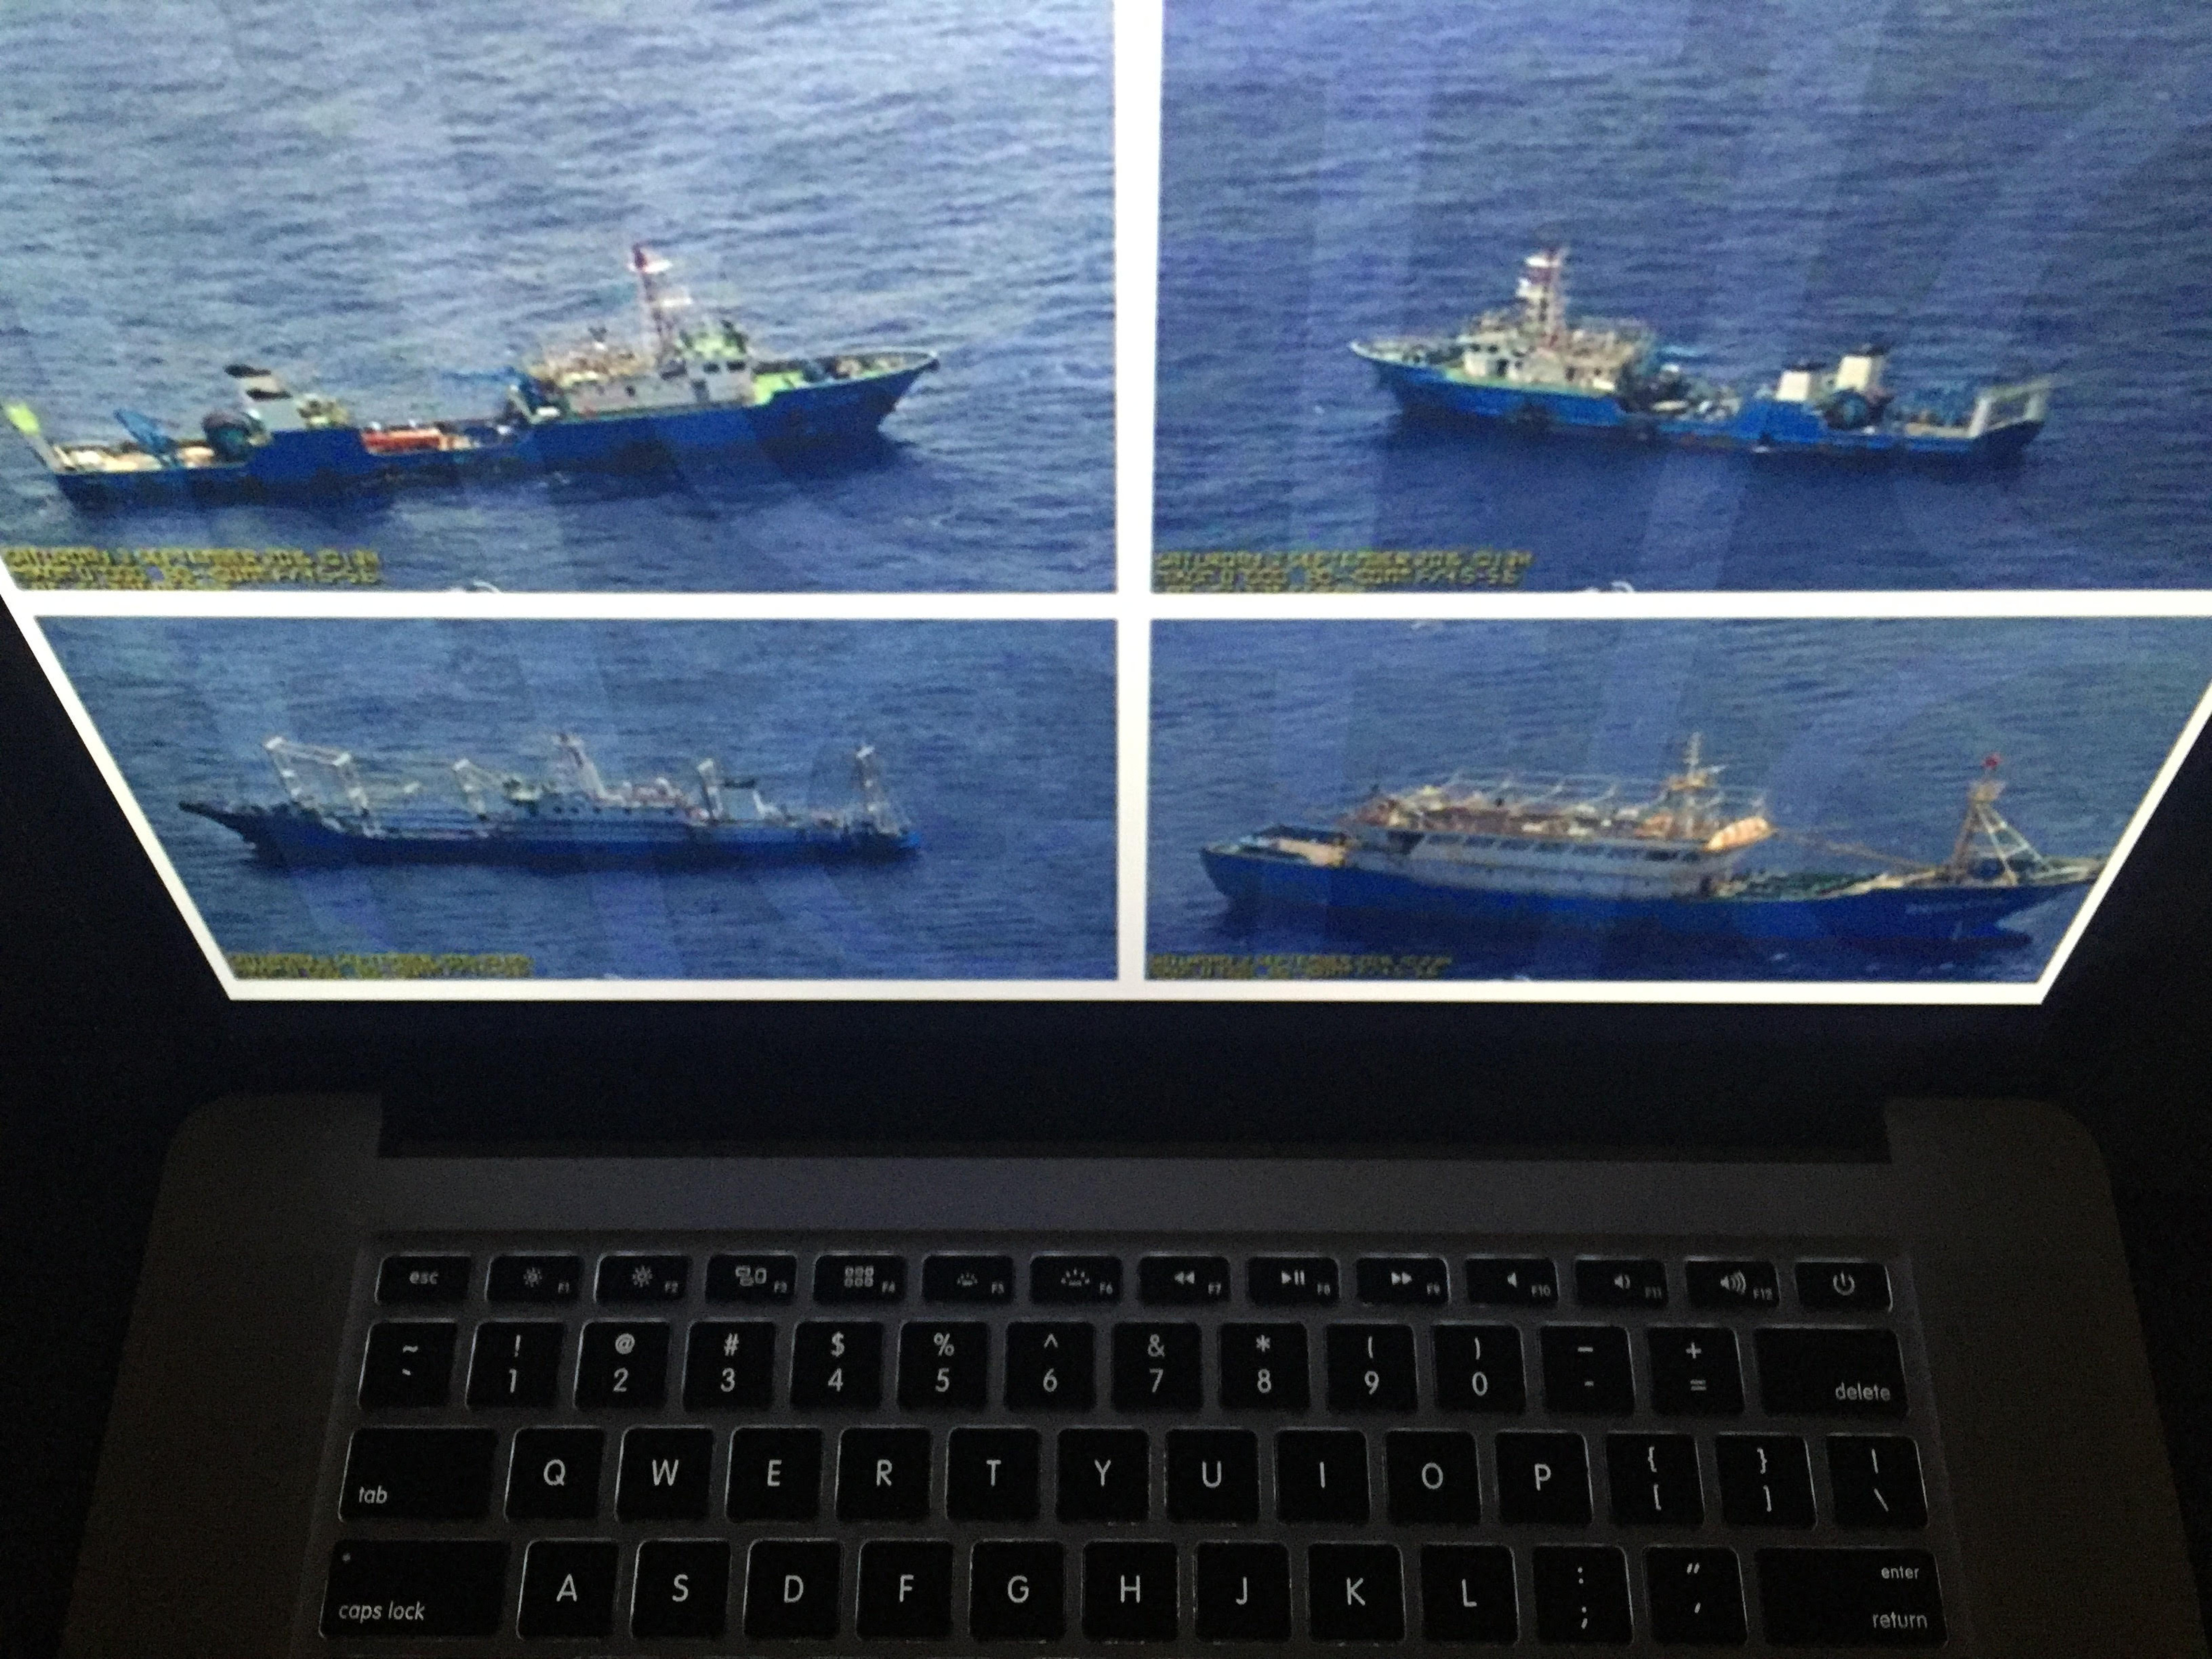 Photographs of apparent Chinese coast guard ships and barges at the disputed Scarborough Shoal in the South China Sea were released by the Philippine government just hours before the Chinese premier attended a summit with Southeast Asian leaders on Wednesday. | AP